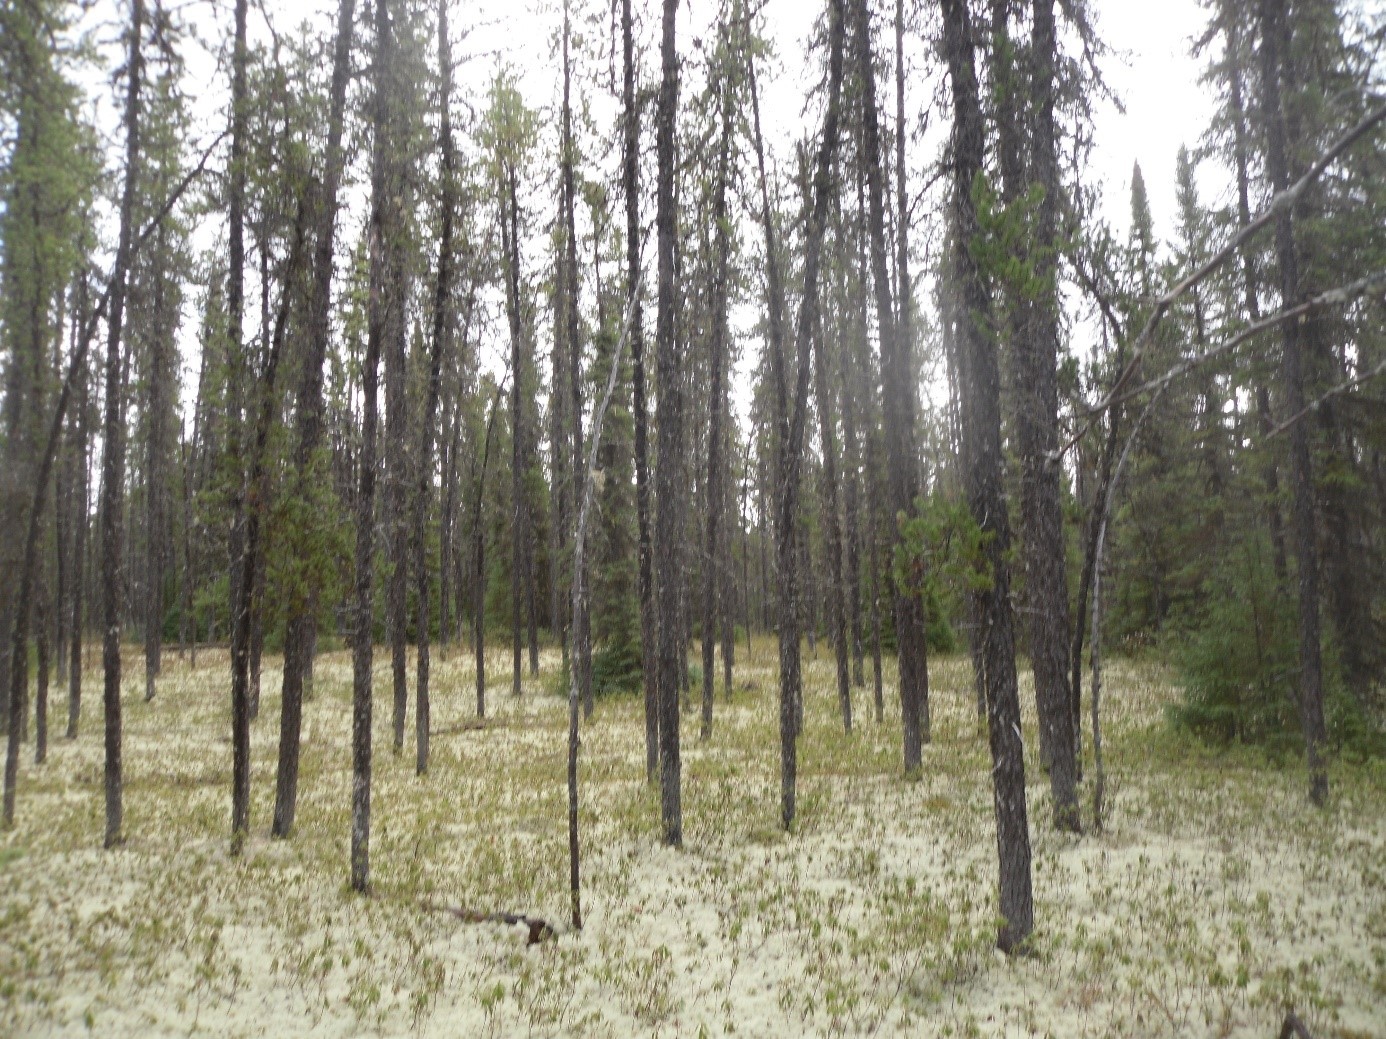 Even-aged boreal forest, where black spruce and jack pine blend here. The structure of the forest is very simple, with trees of the same size.